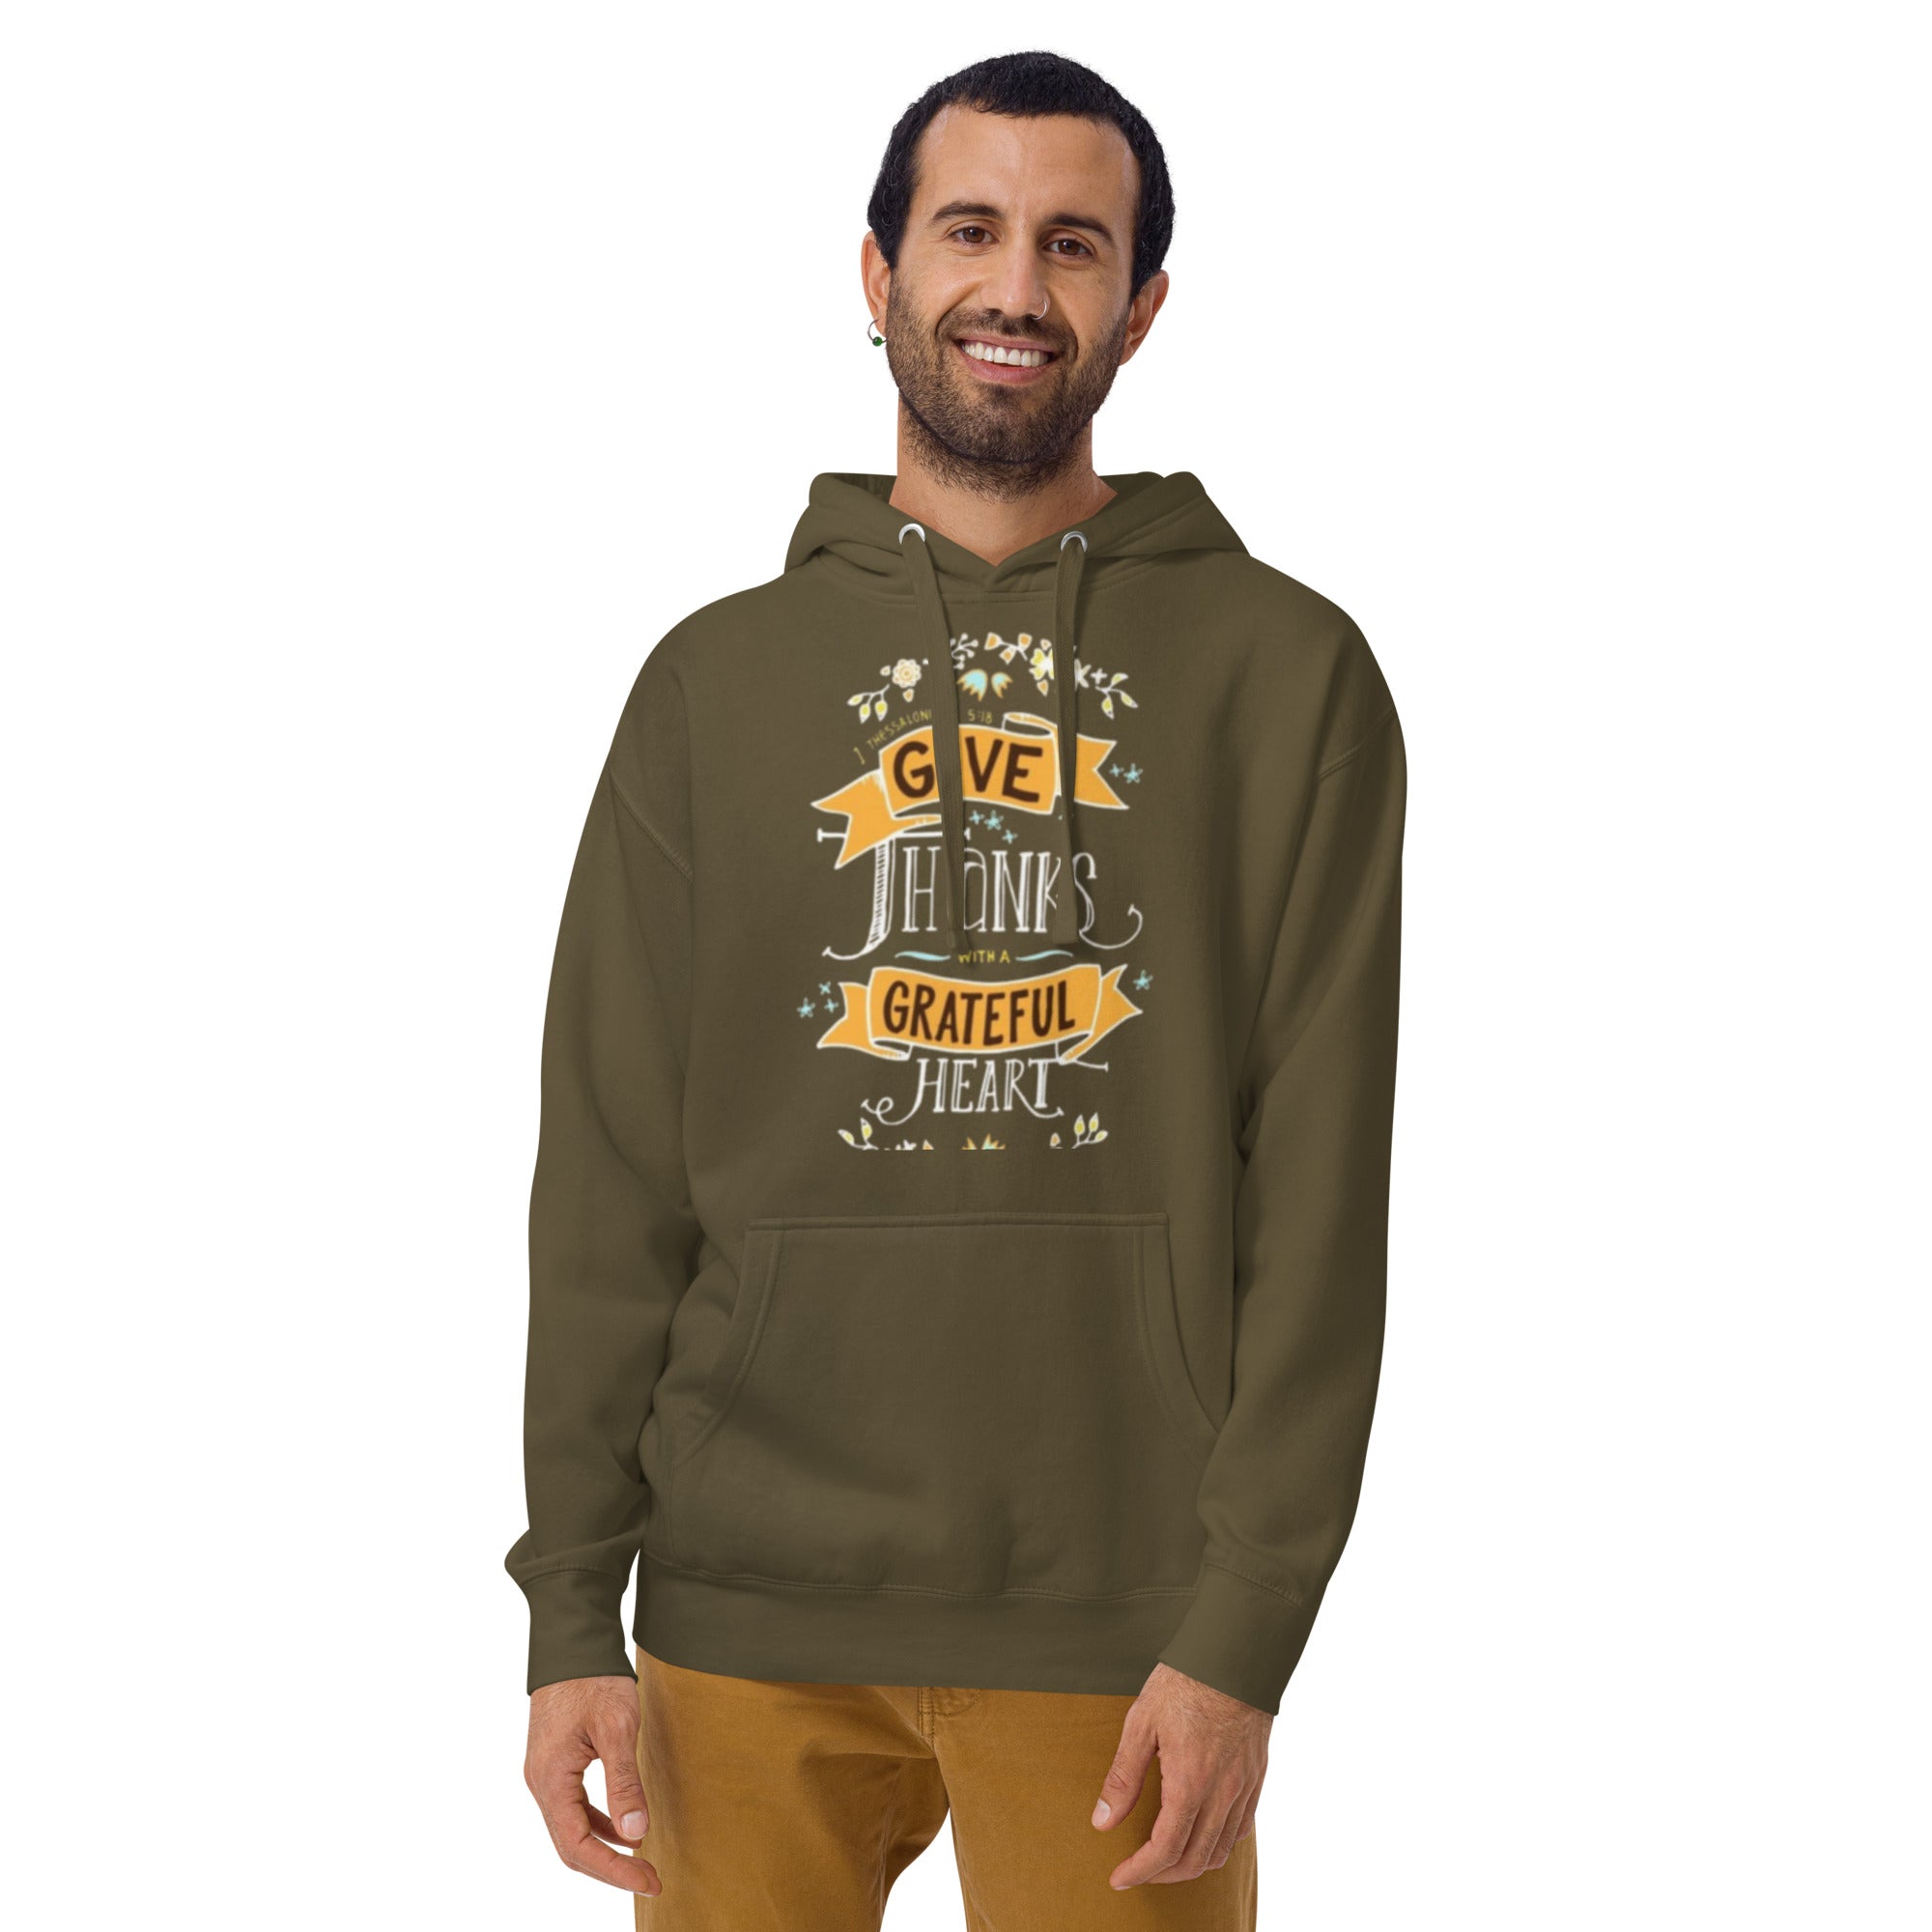 Buy Give Thanks with A Grateful Heart Hoodie | Shop DIANES DELIGHT FUL PRINTS